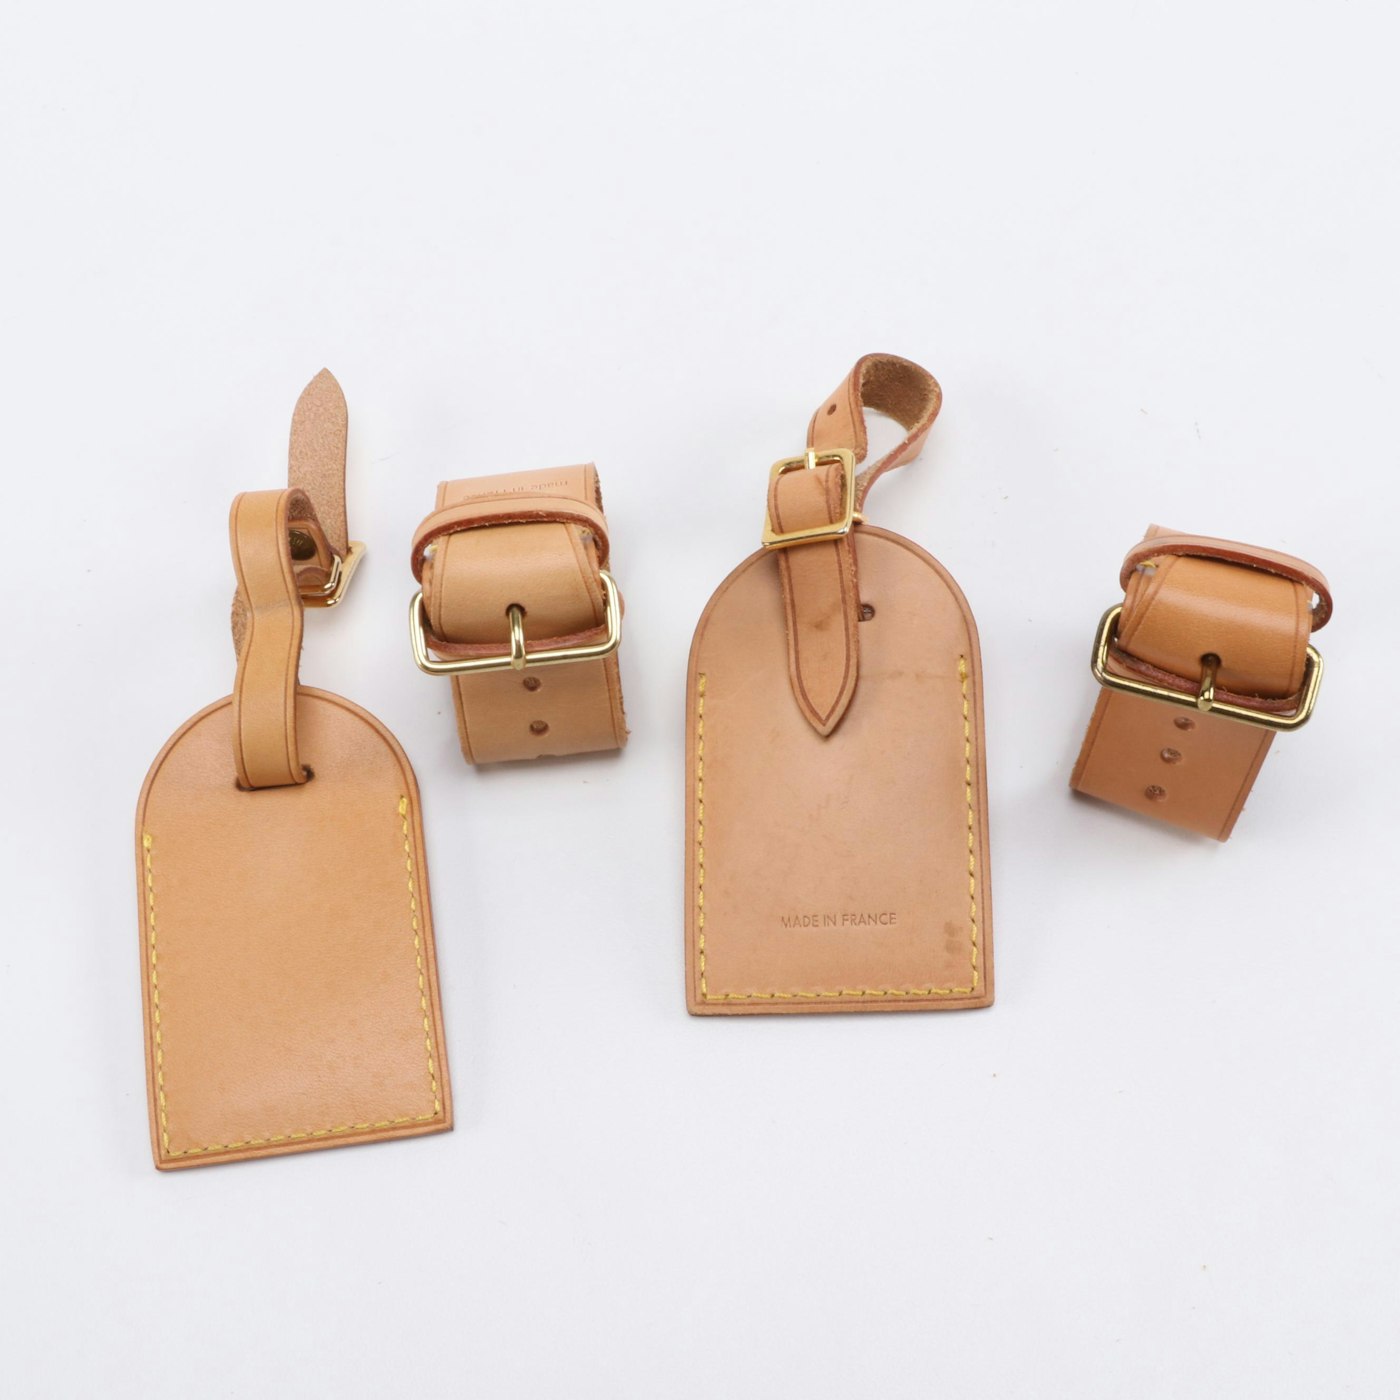 Louis Vuitton Small Luggage Tag and Poignet in Vachetta Leather